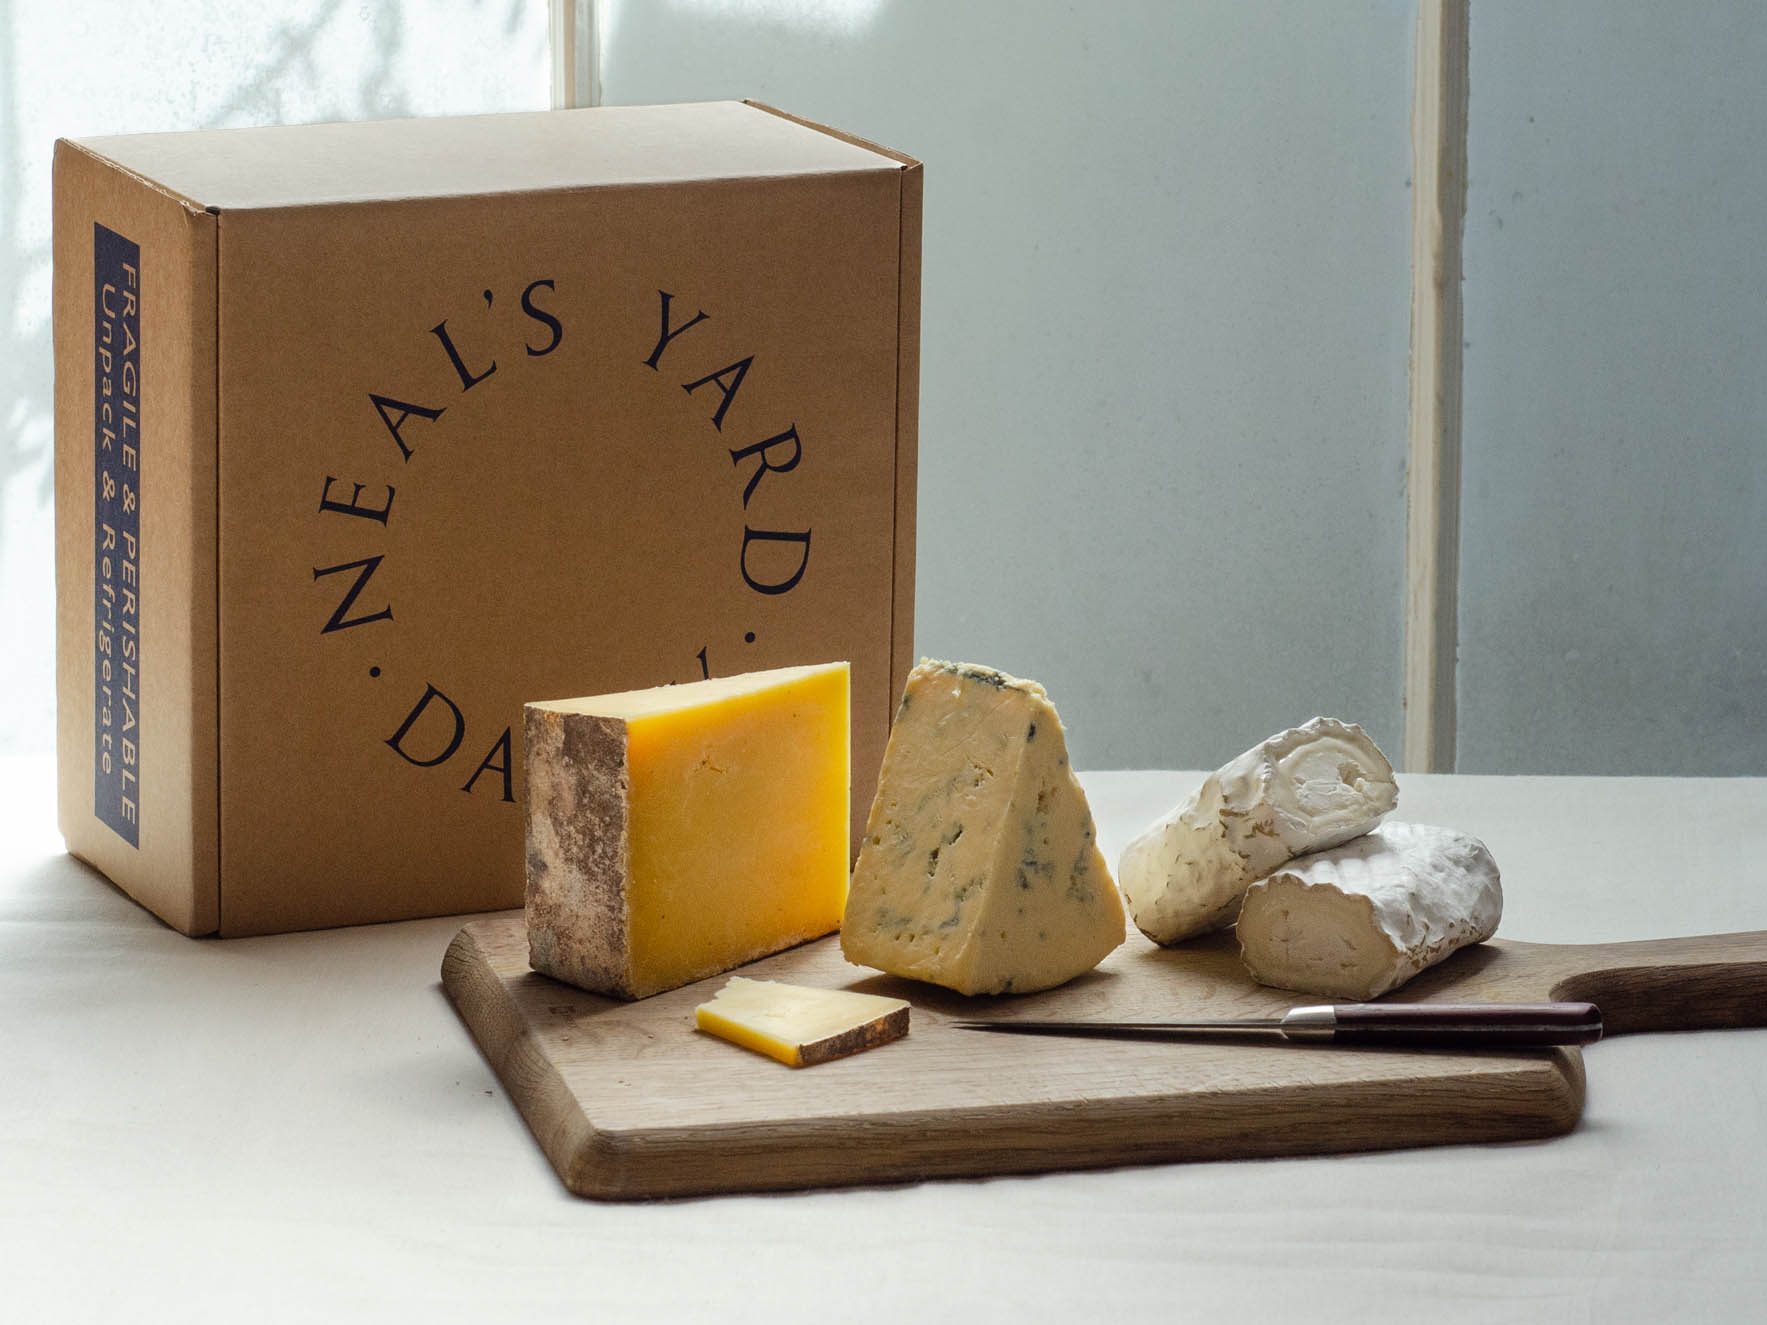 Neal’s Yard teamed up with Jamie Oliver to create the Save British Cheese?box (Neal’s Yard Dairy)